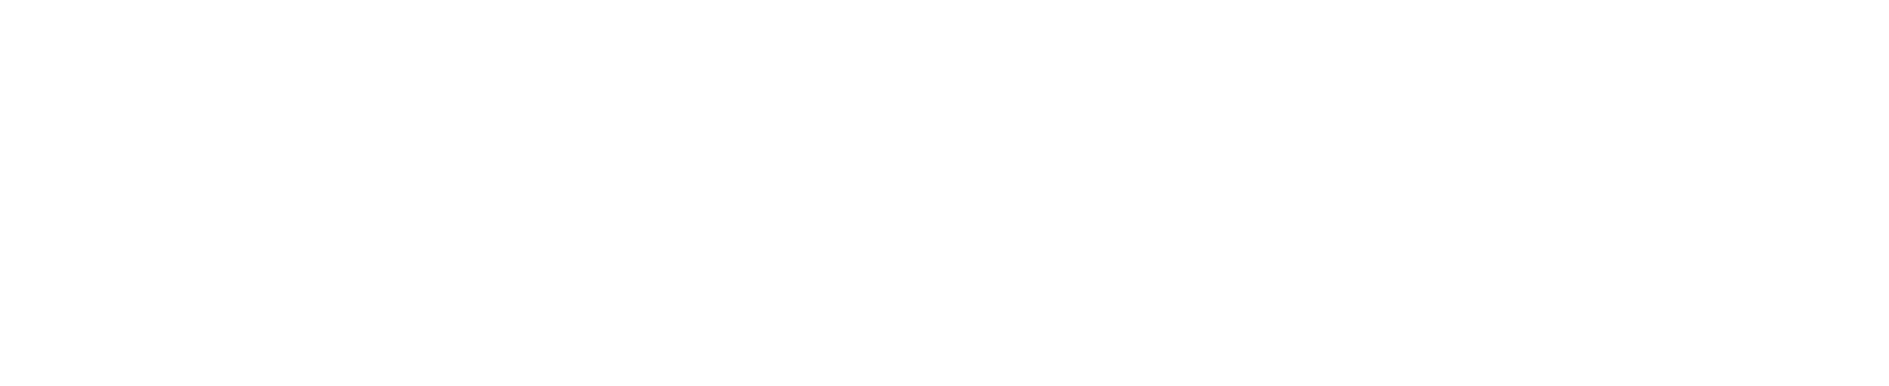 six zone logo all forms-06